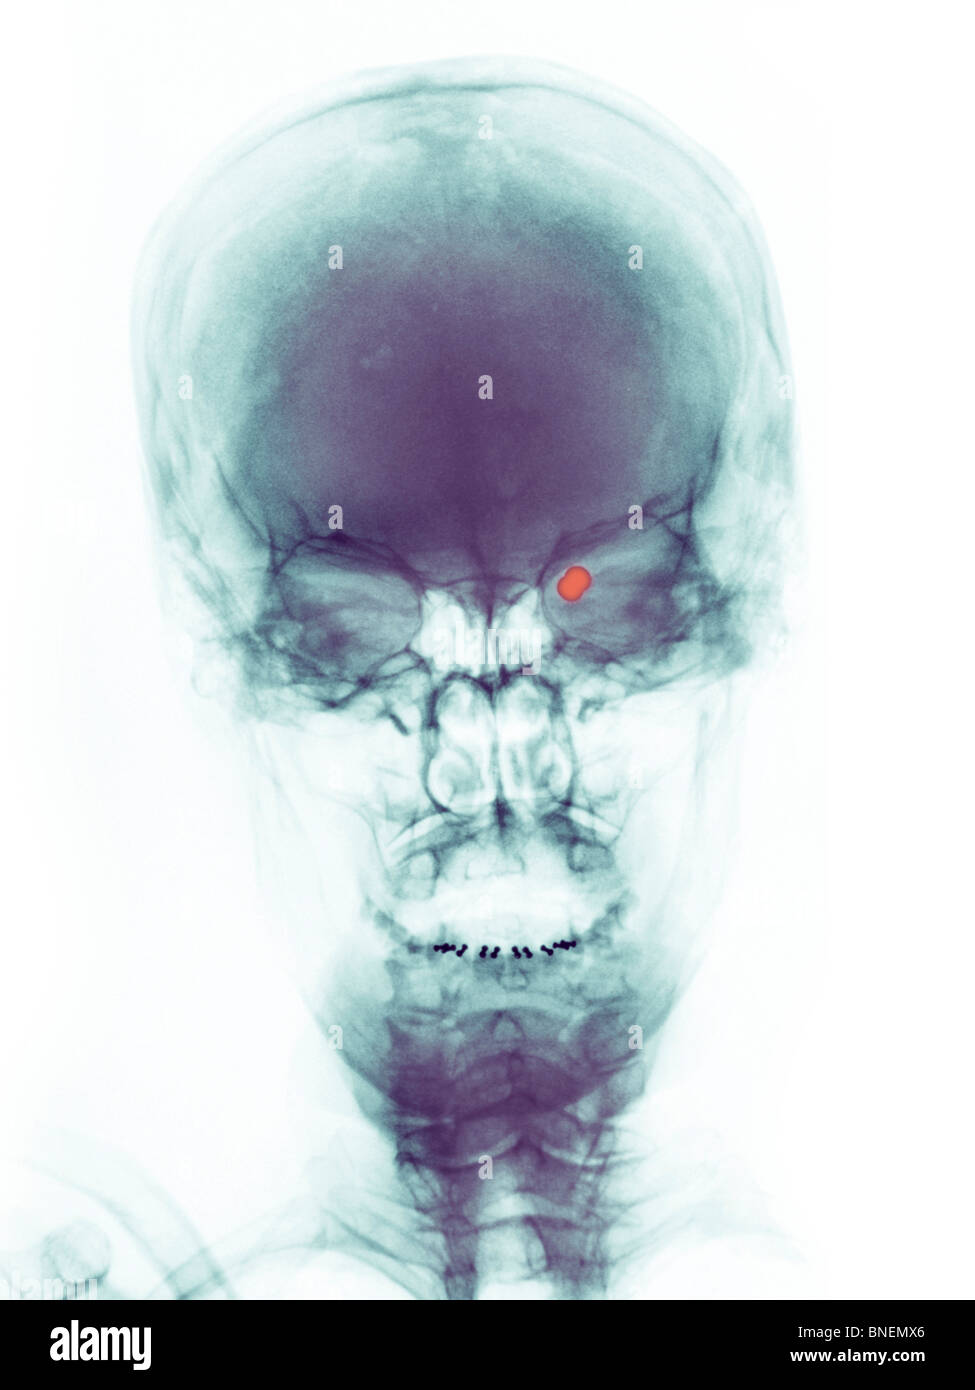 skull x-ray of a woman shot in the eye with a pellet gun. Stock Photo